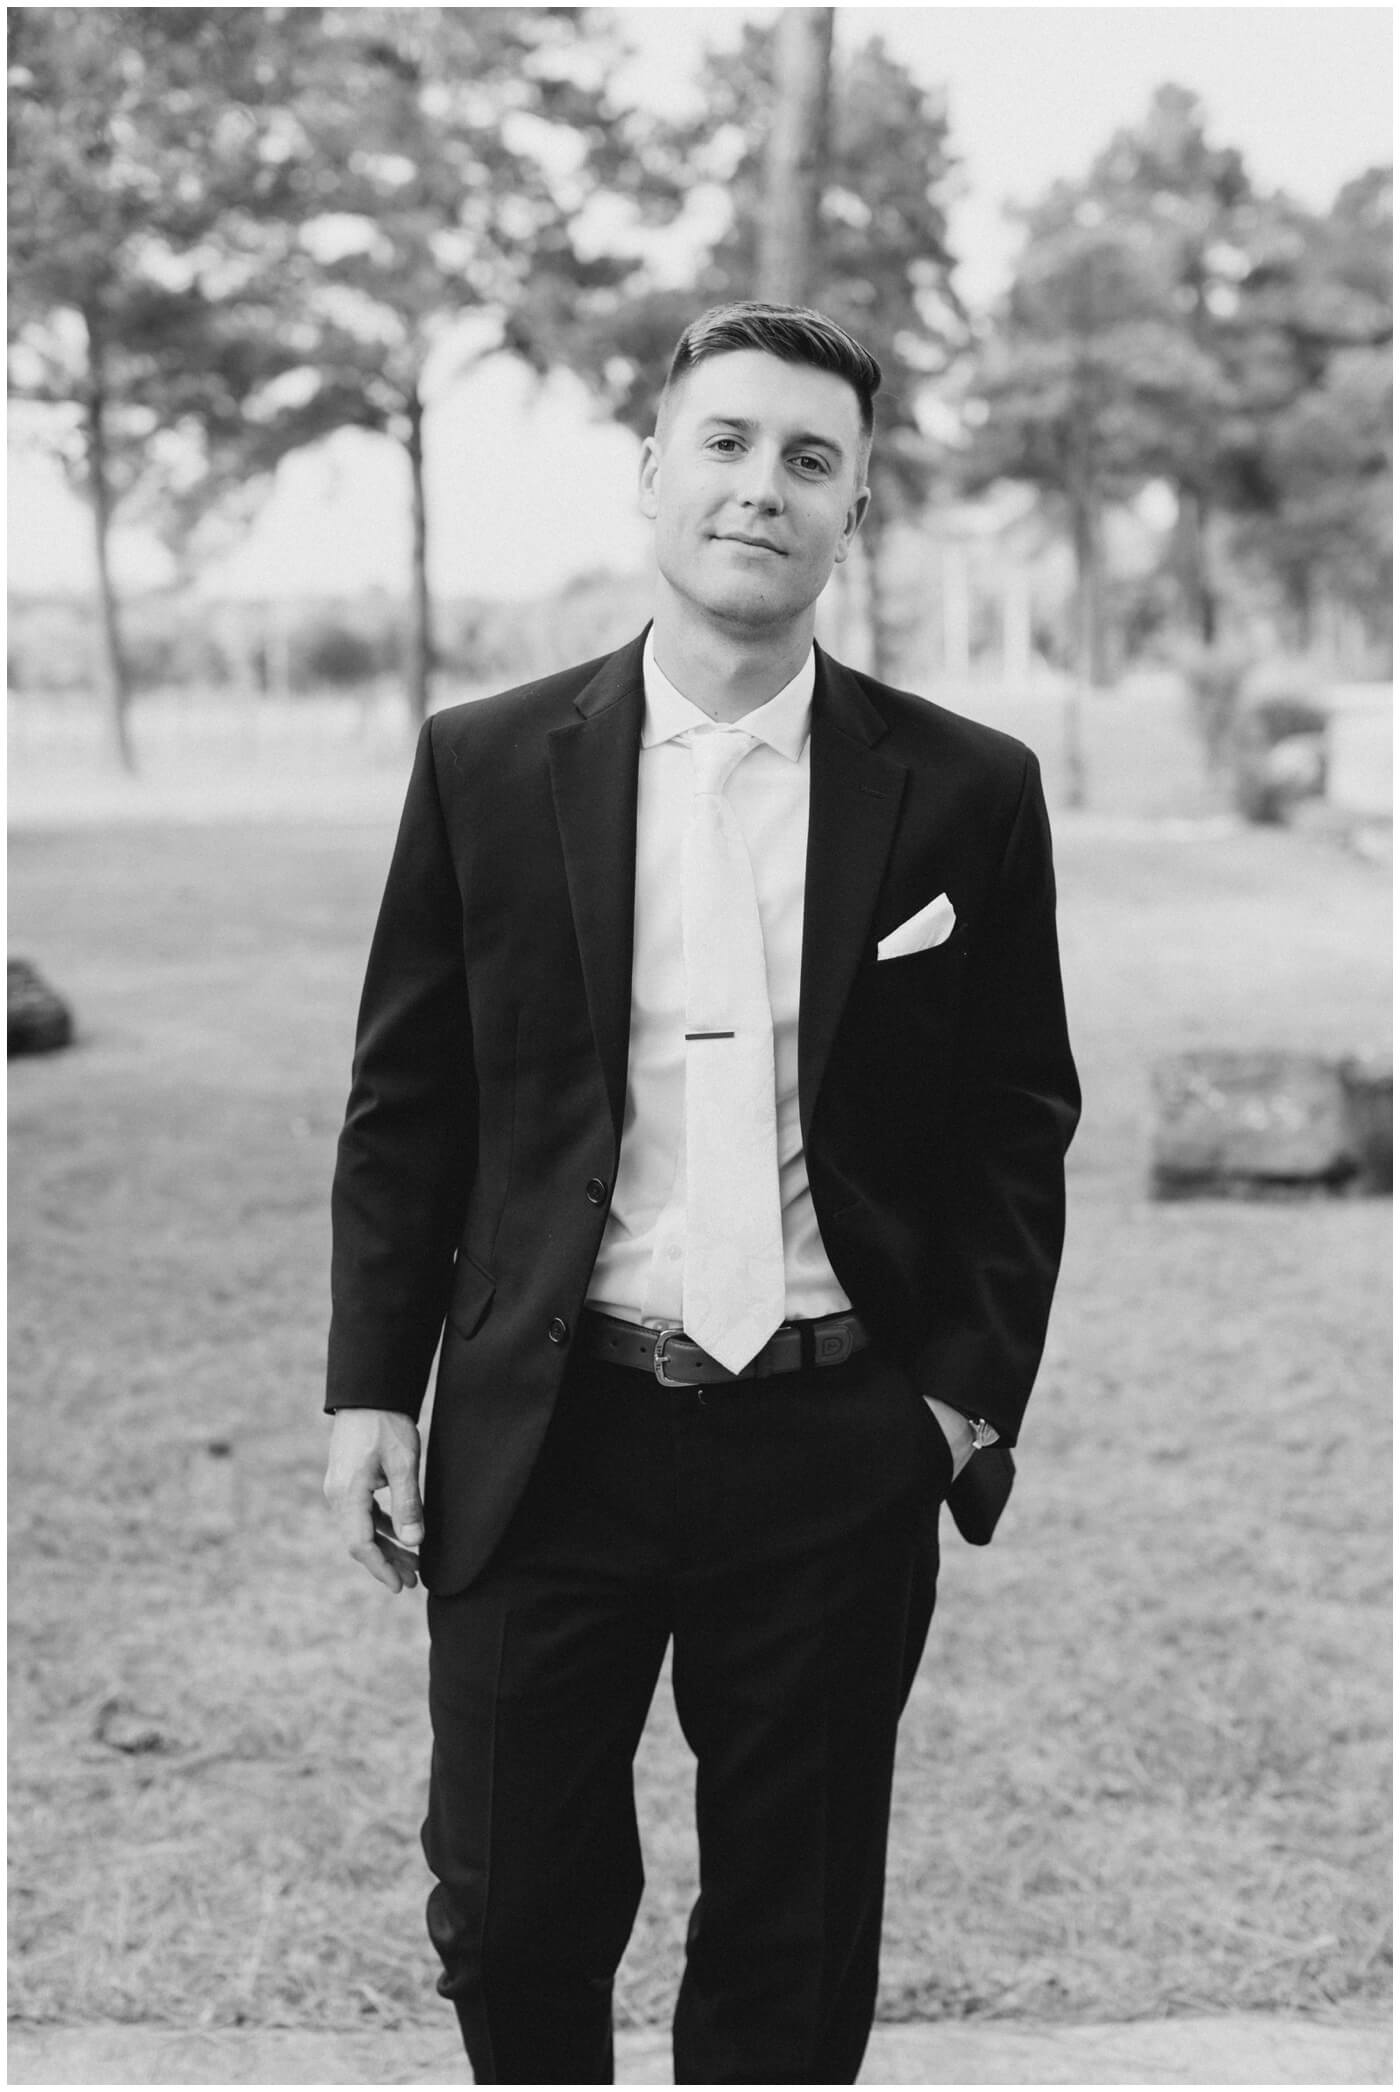 Houston Wedding at The Vine | the groom smiling on his wedding day 